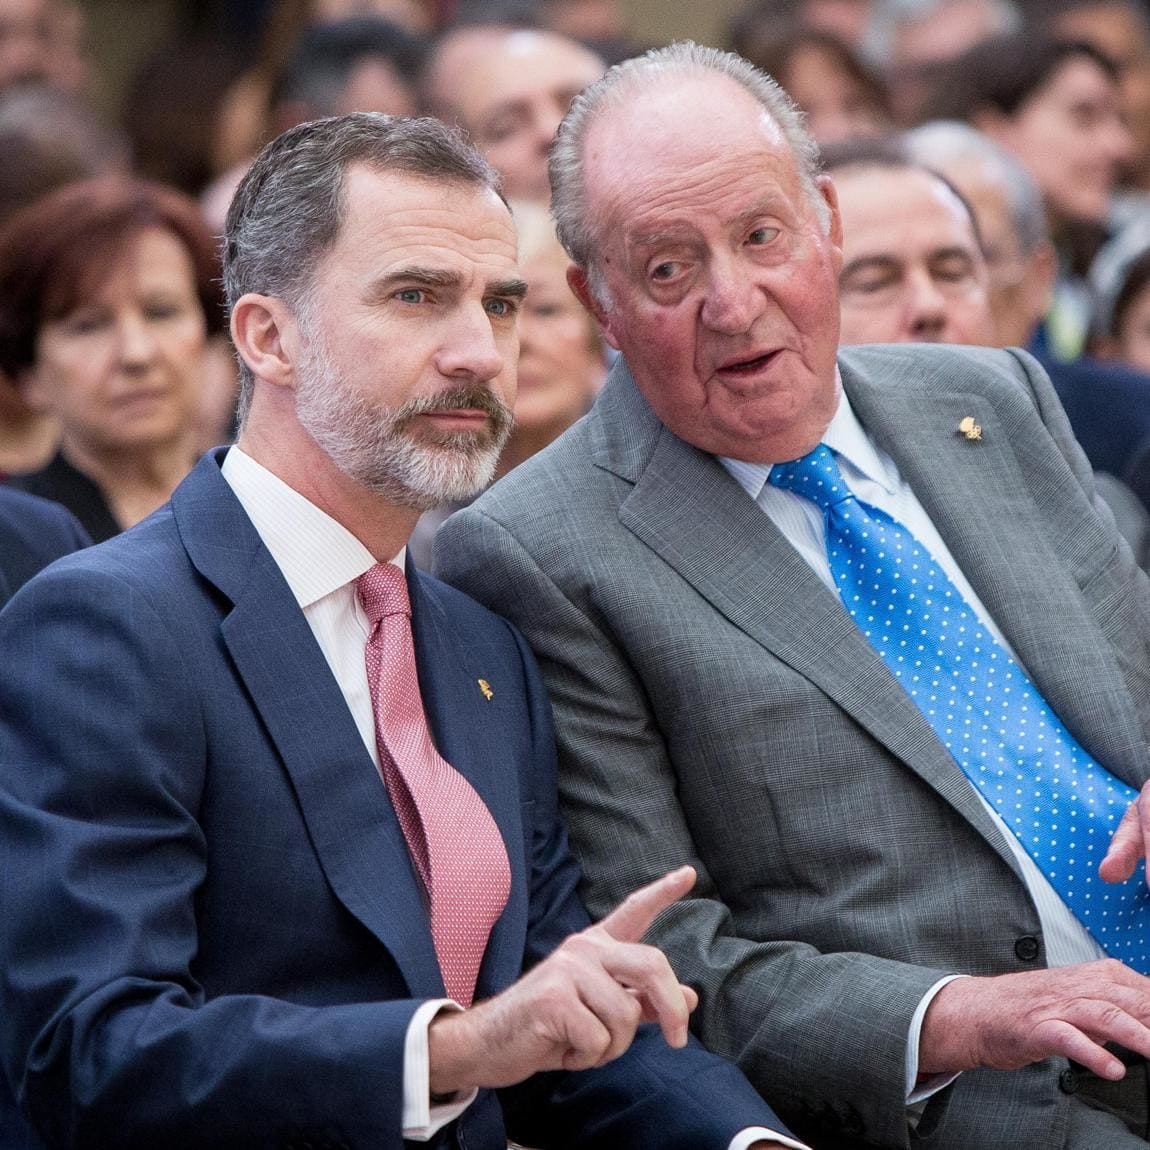 Queen Letizia's father in law withdrew from public life in 2019